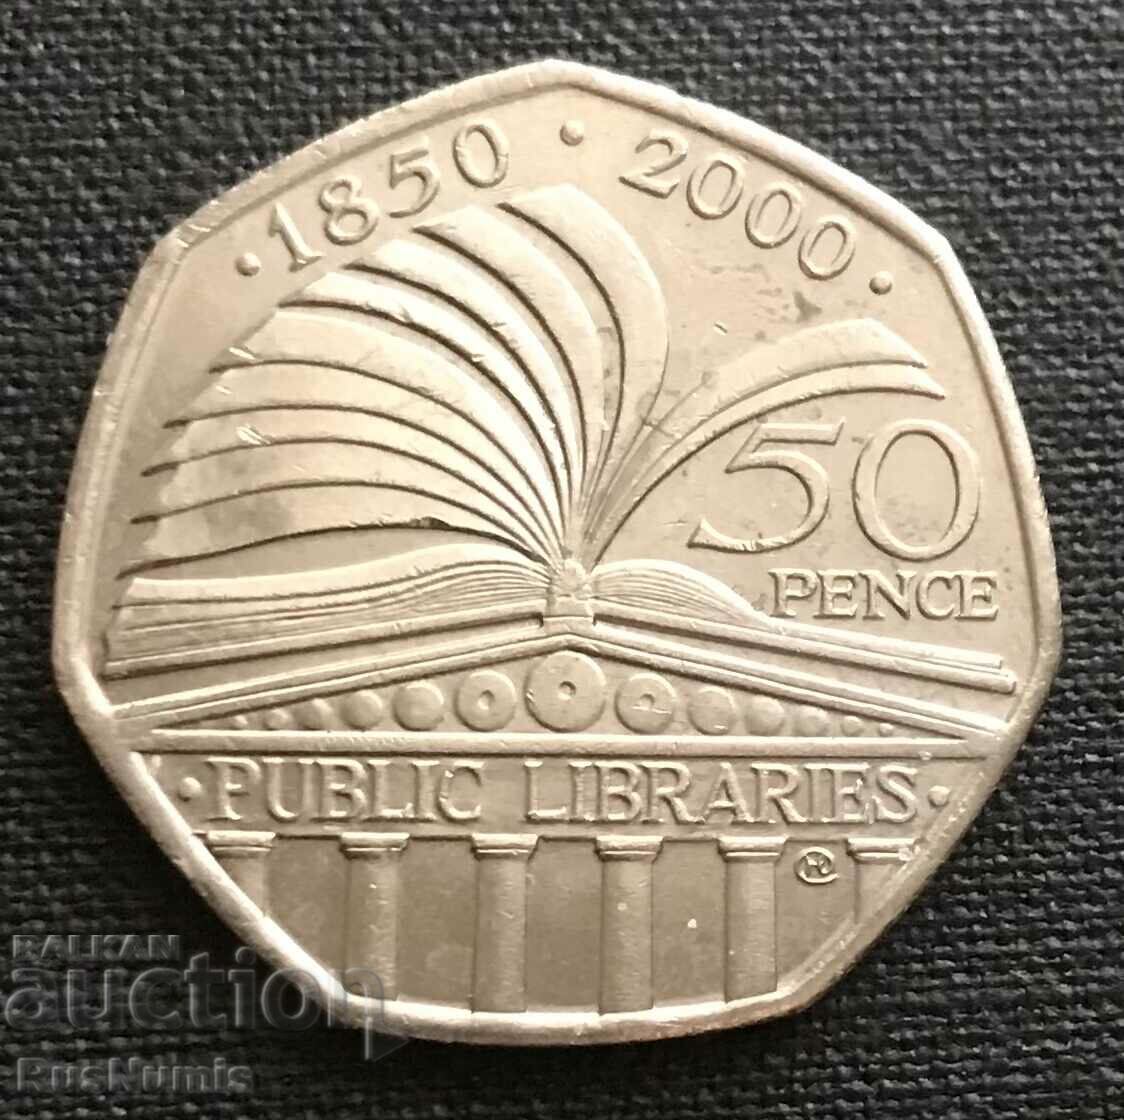 Great Britain.50 pence 2000.Public Libraries.